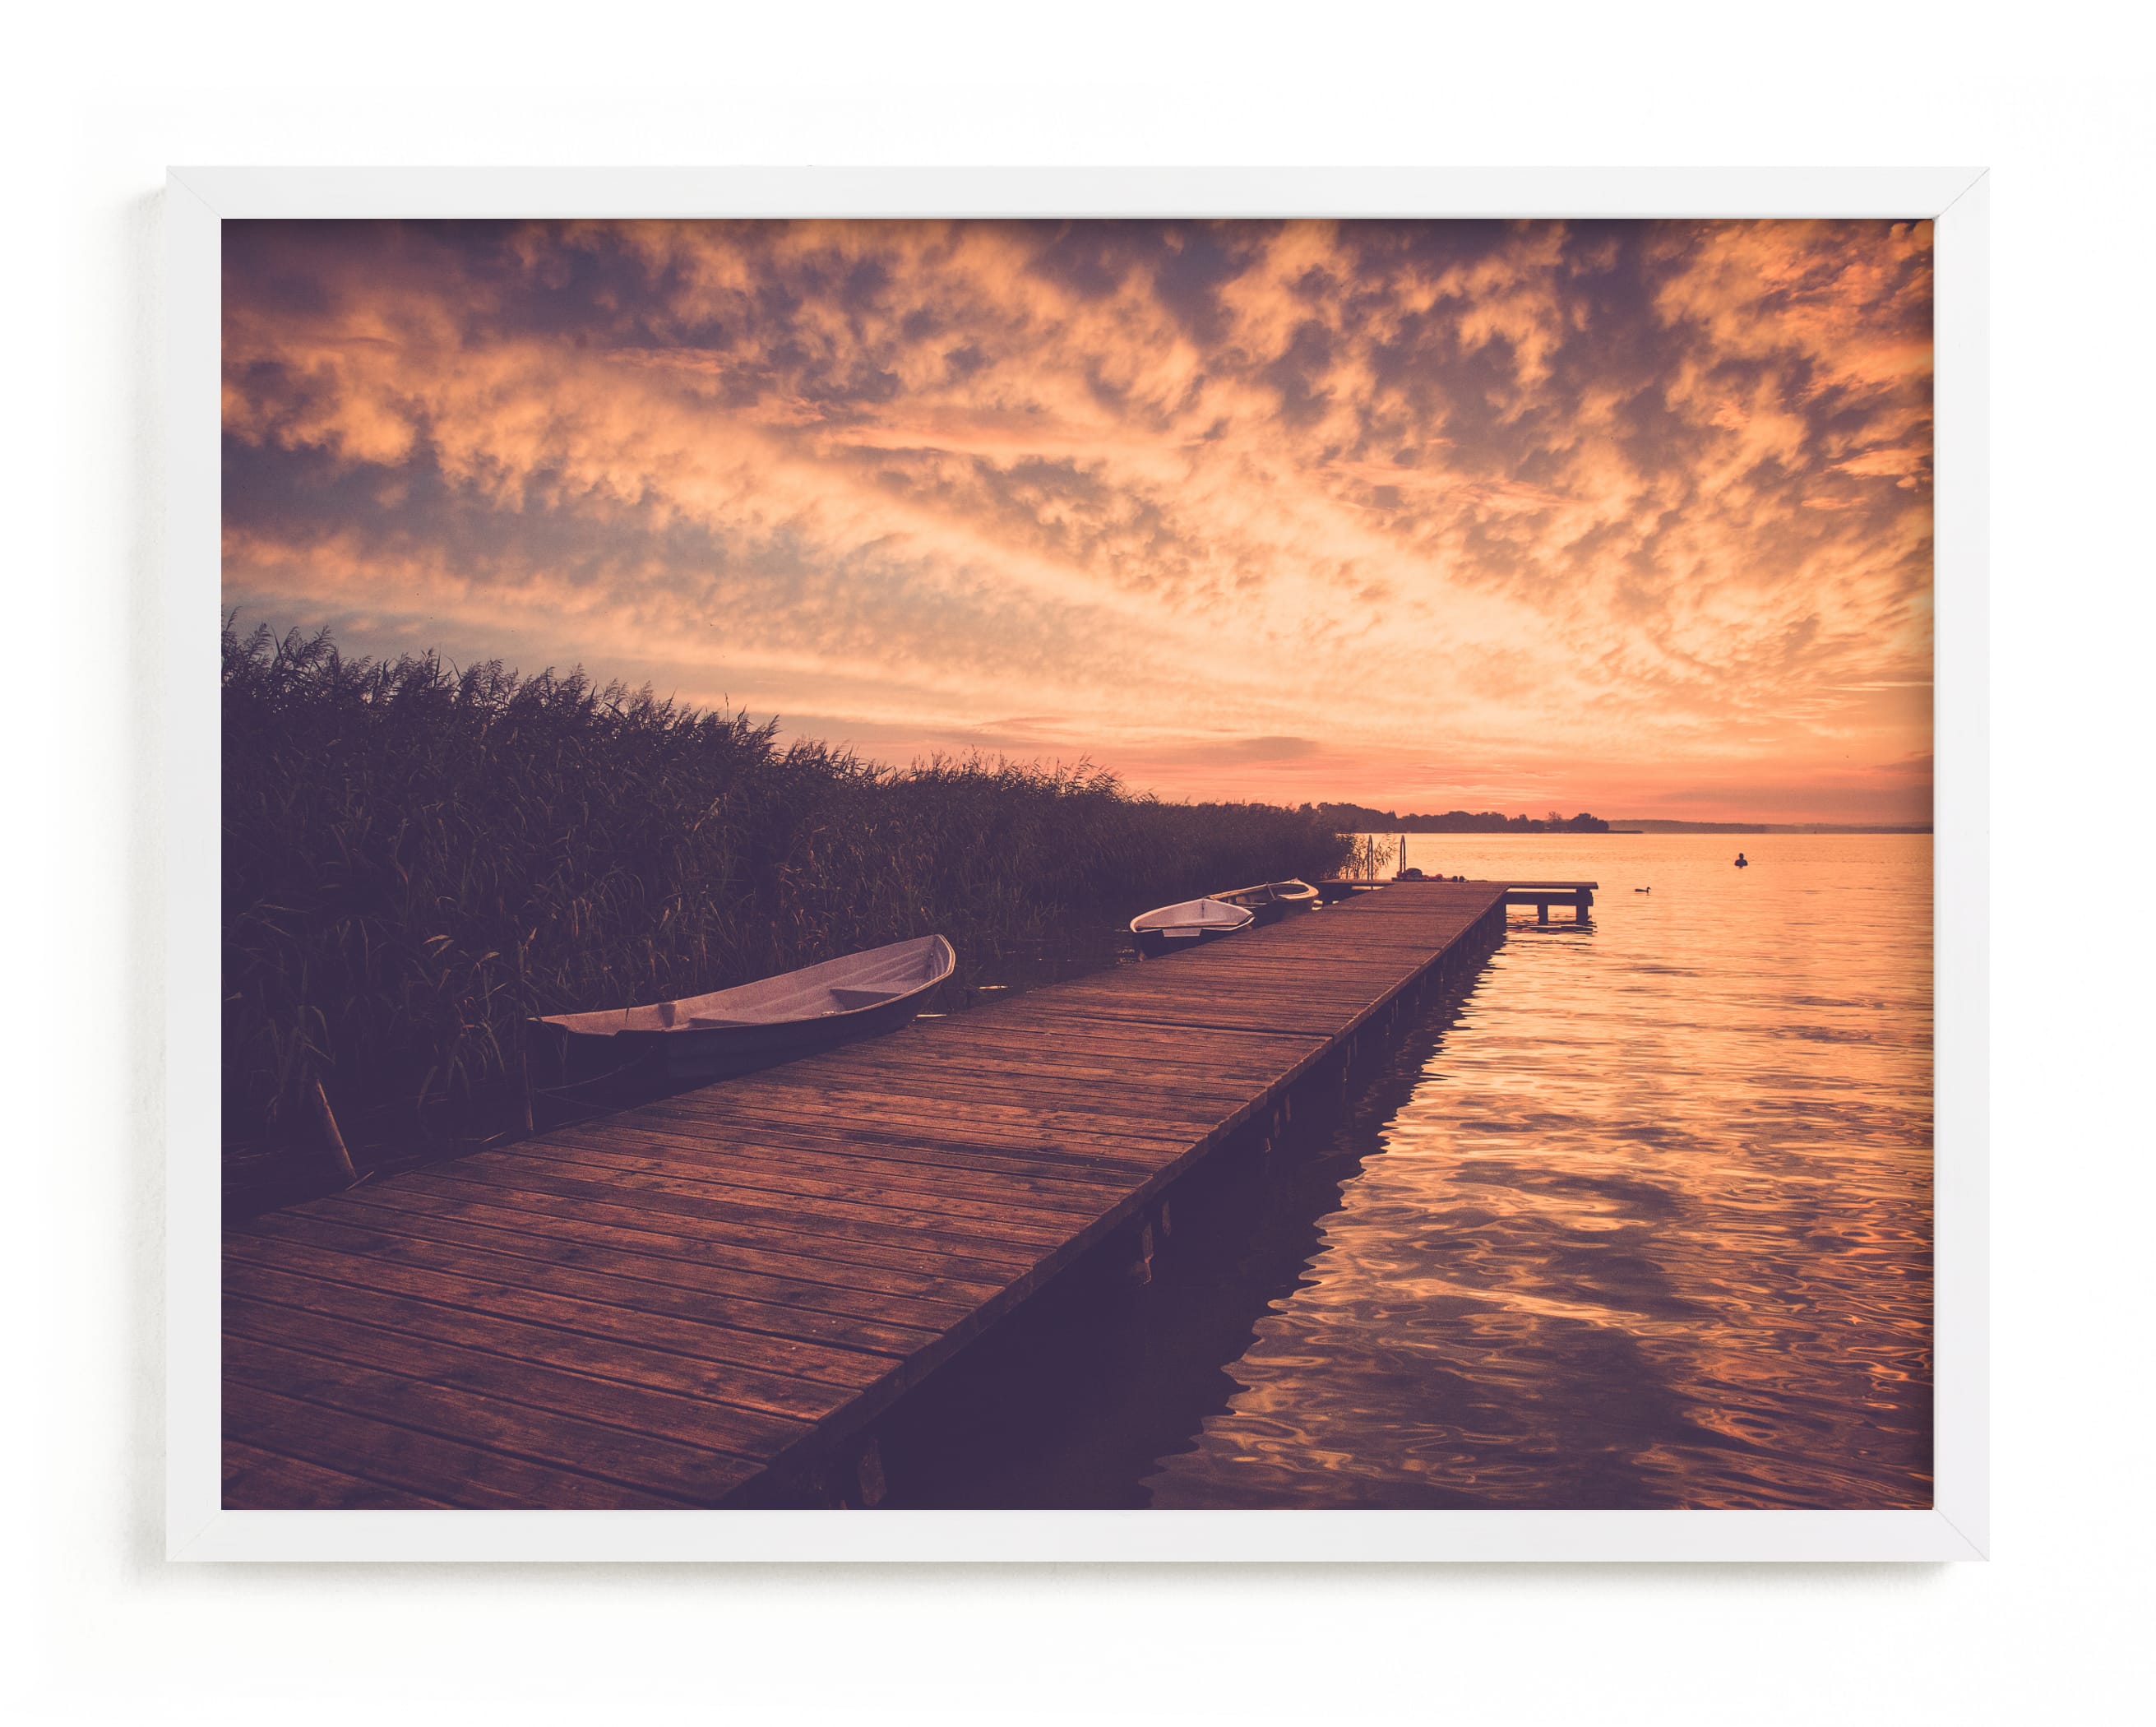 "Red sunset and boat" by Lying on the grass in beautiful frame options and a variety of sizes.